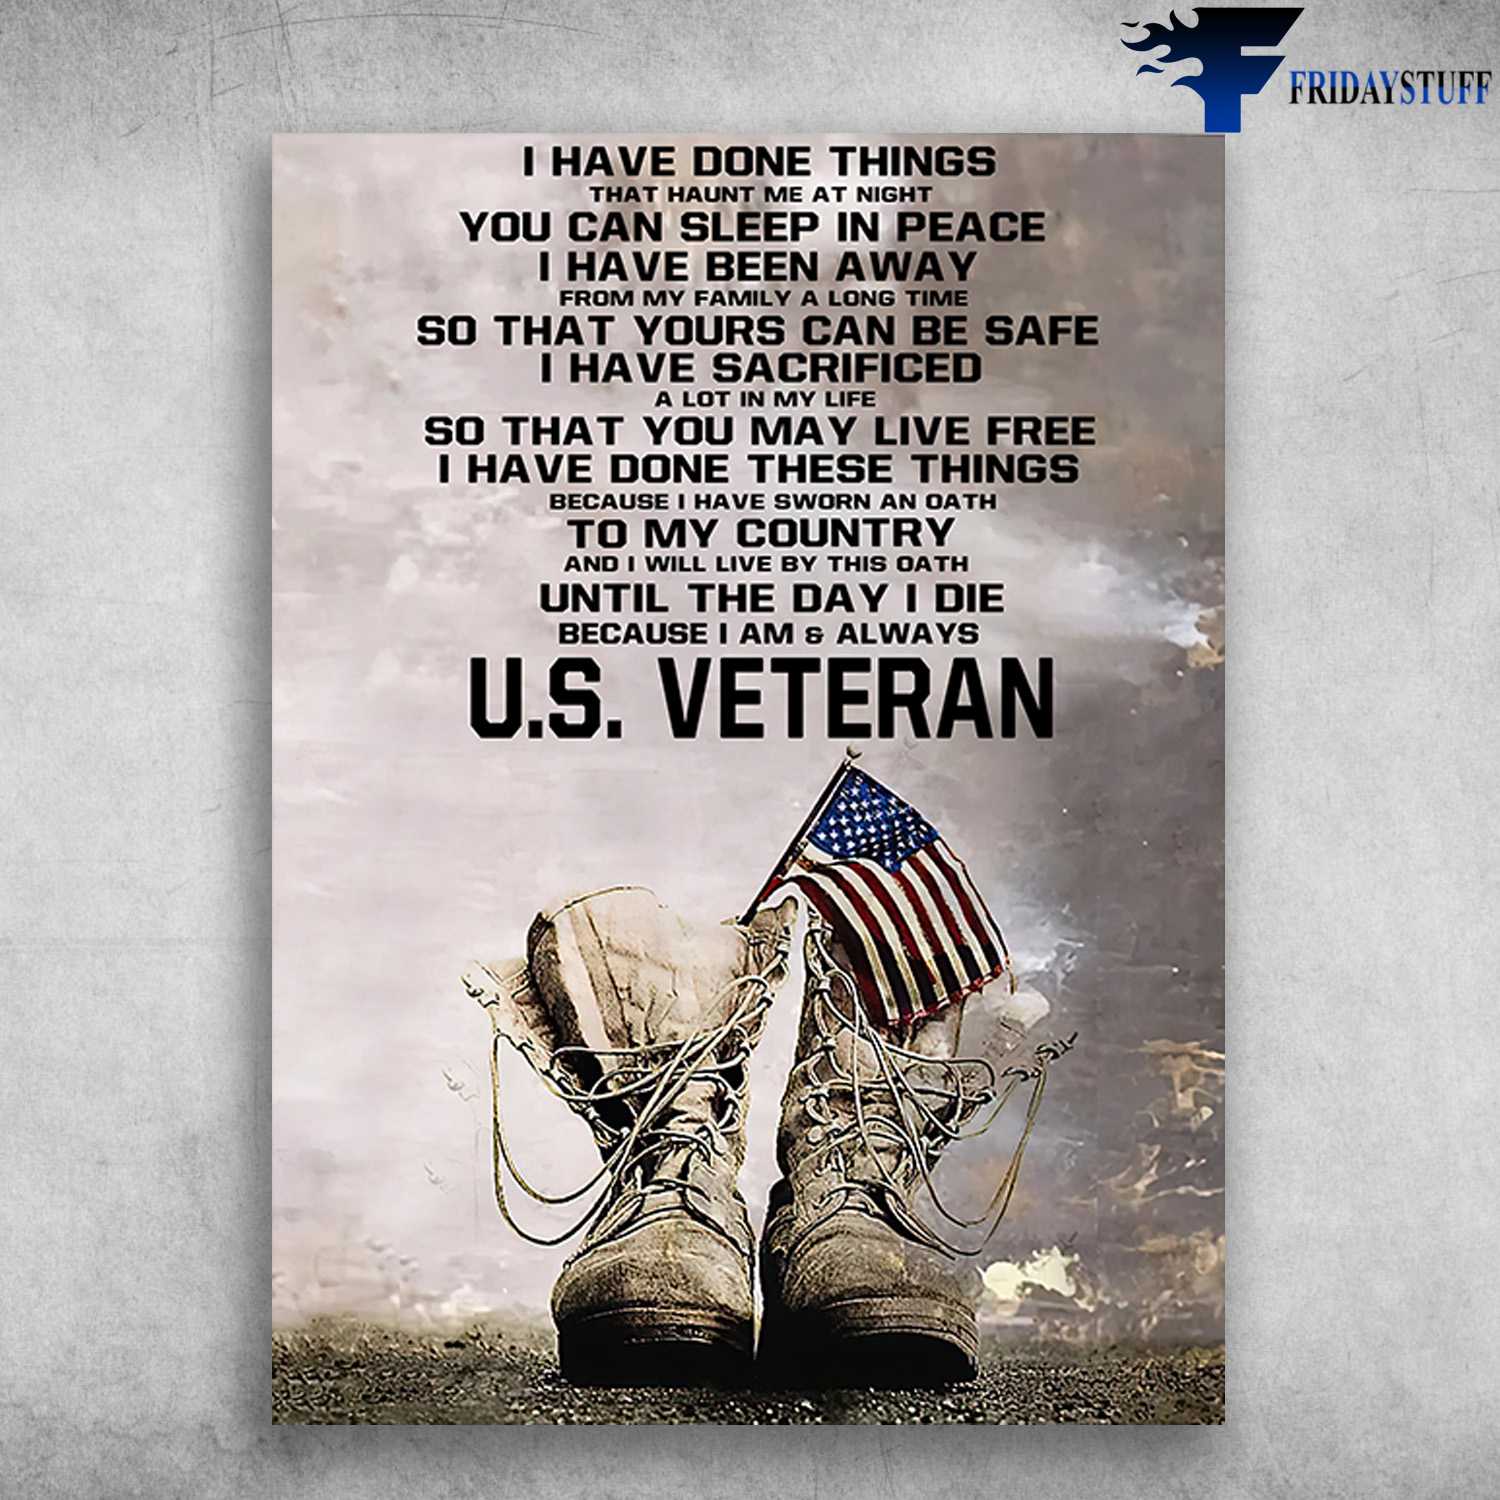 American Veteran - I Have Done Things, That Haunt Me At Night, You Can Sleep In Peace, I Have Been Away, From My Family A Long Time, So That Yours Can Be Safe, U.S. Veteran